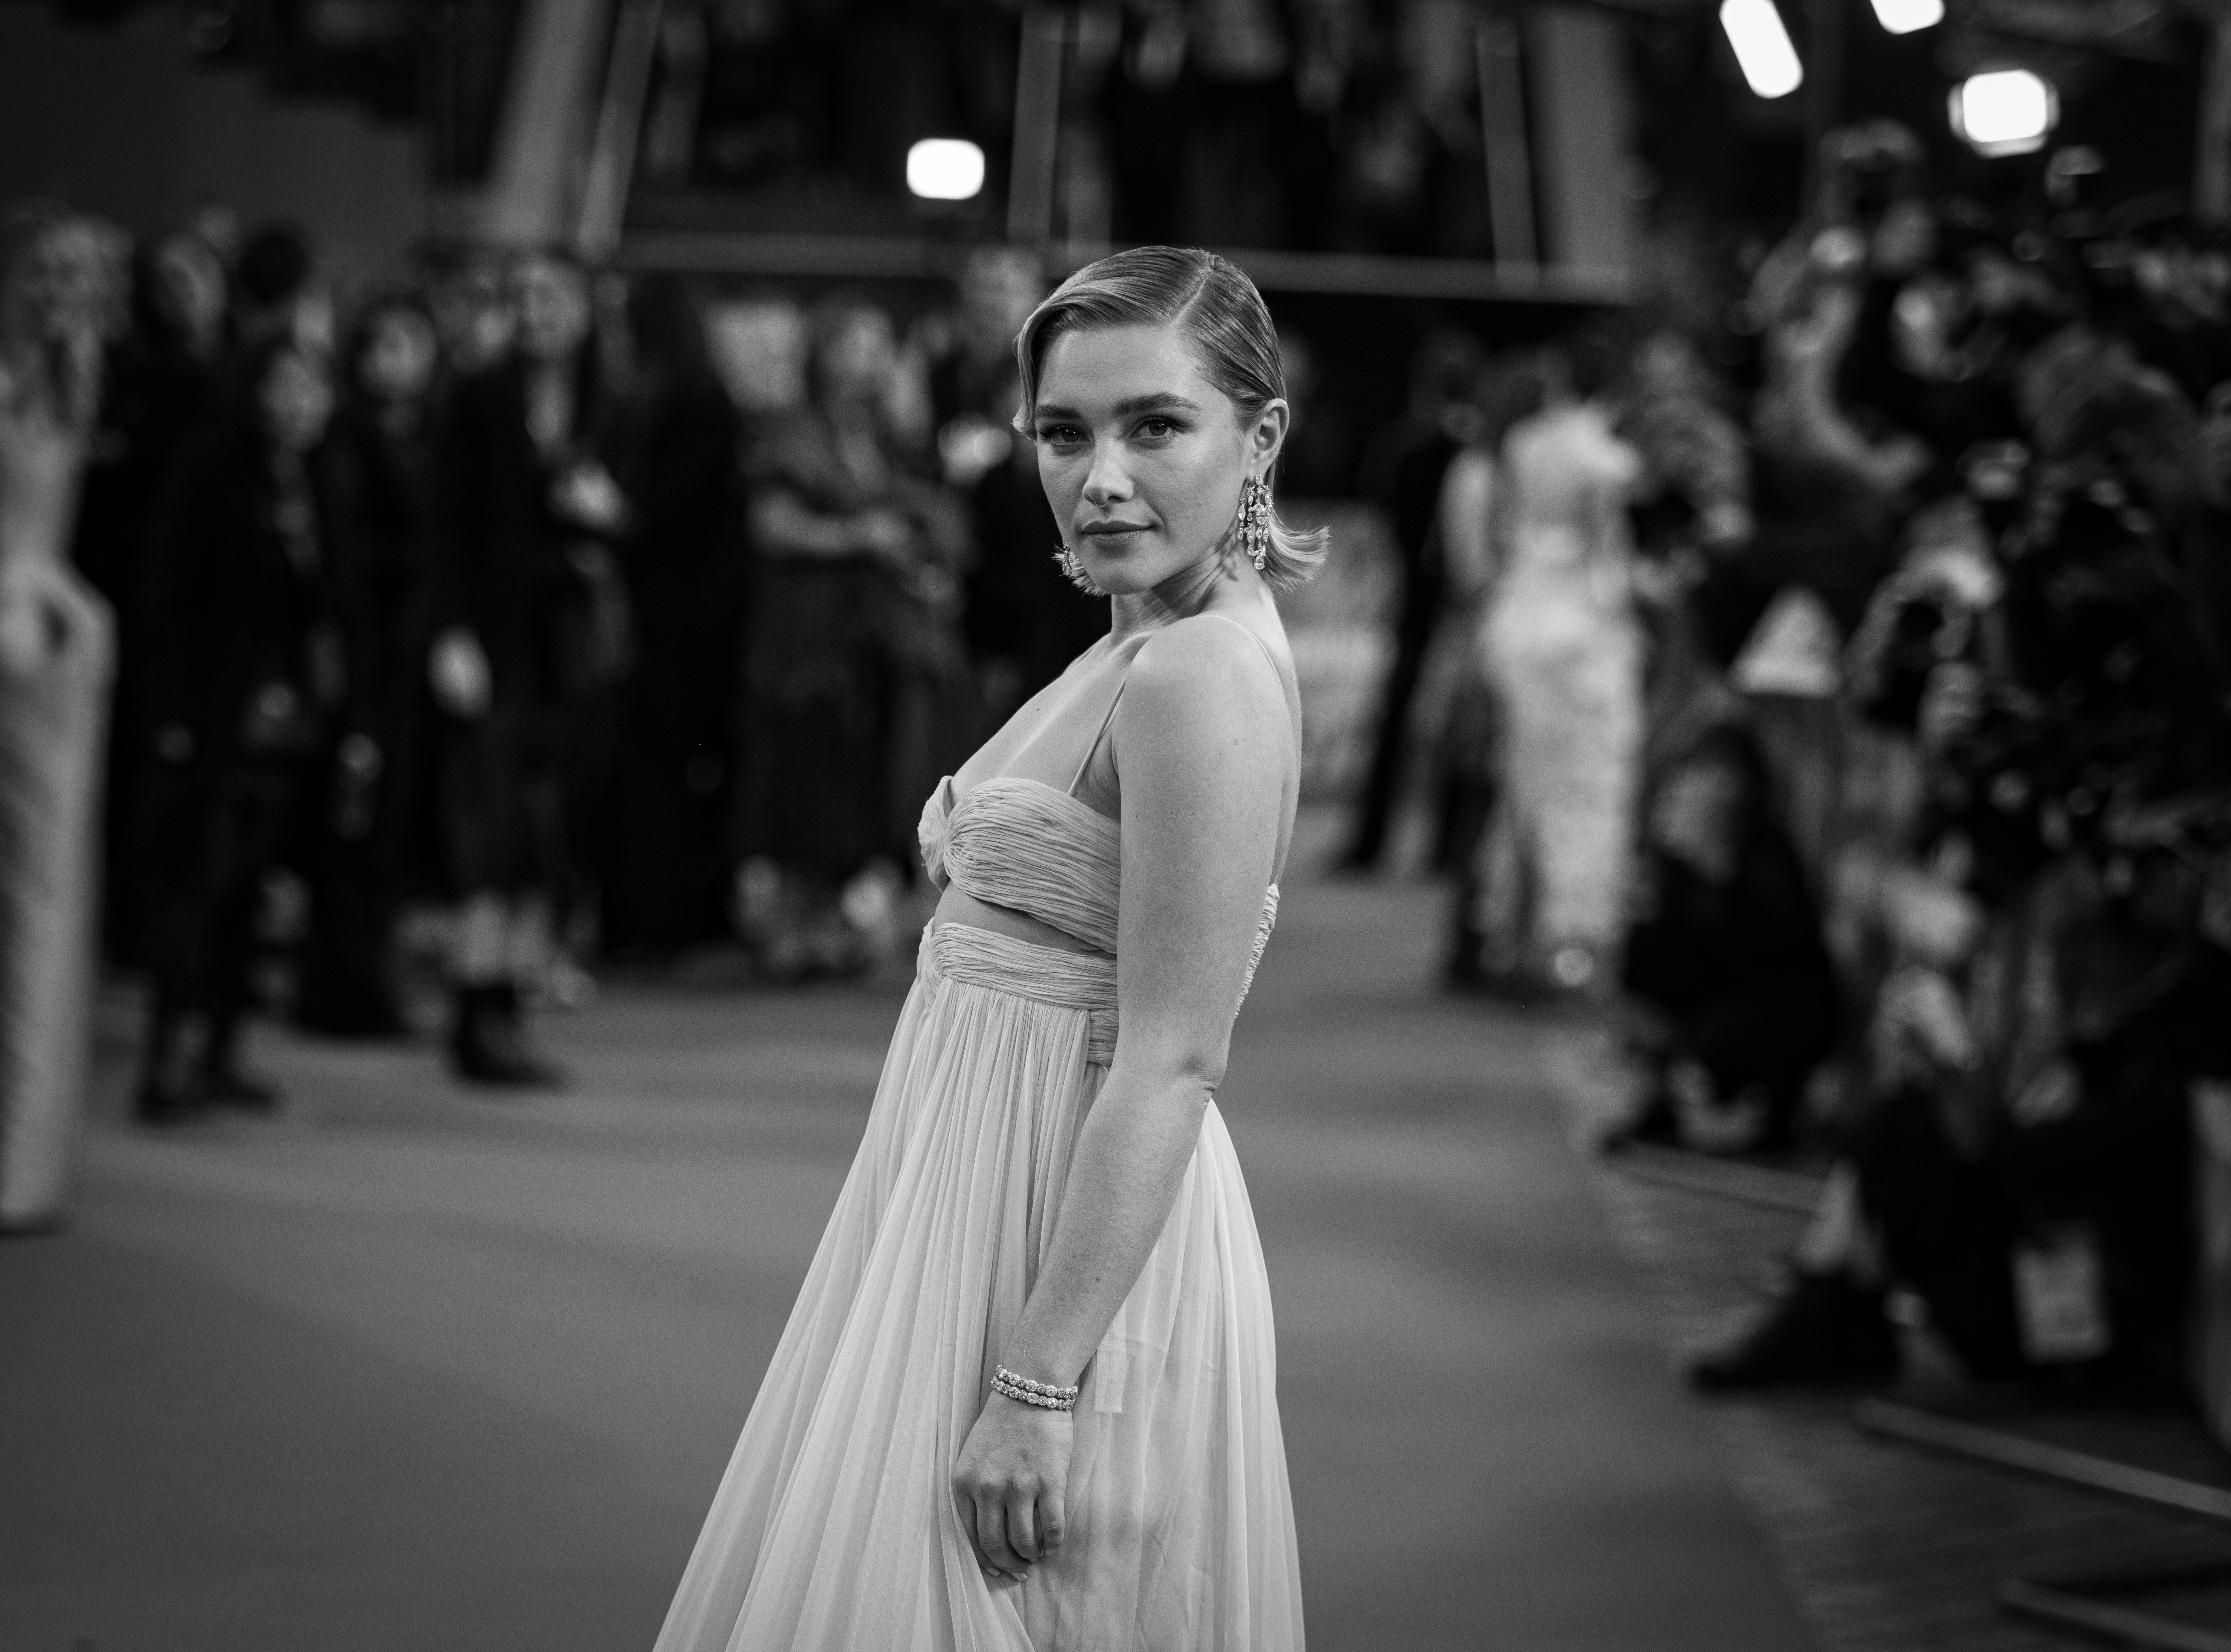 Florence Pugh looks stunning on the red carpet.